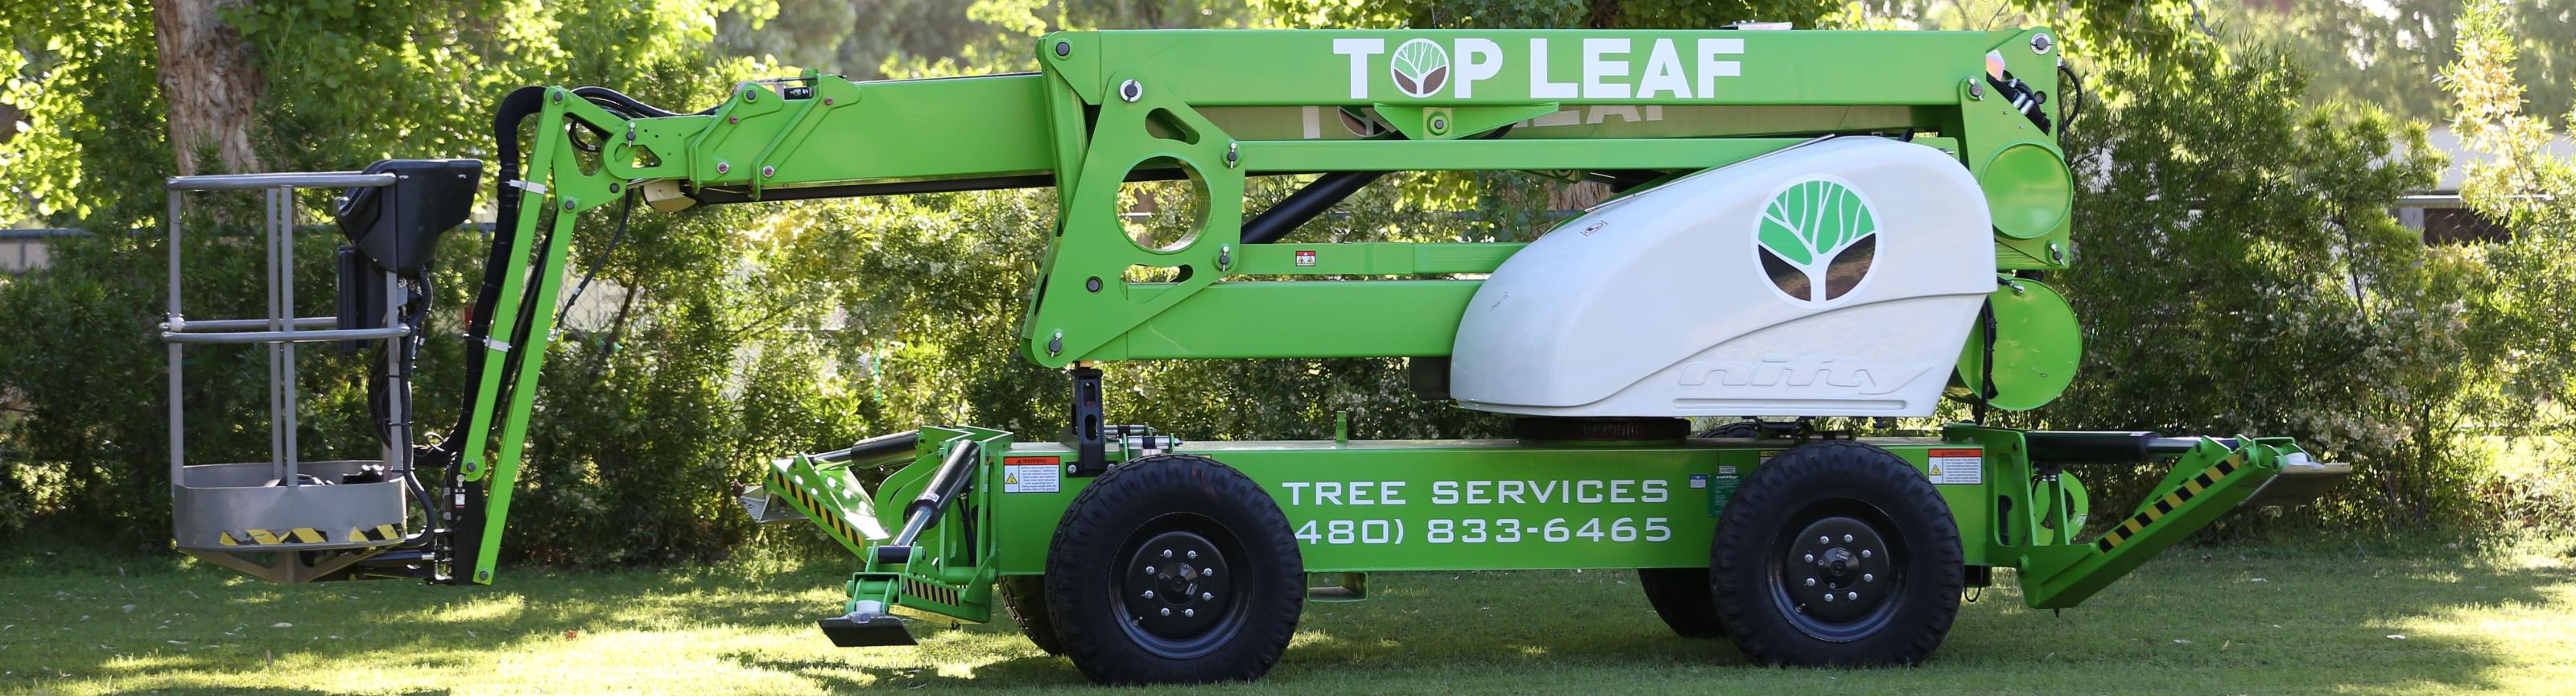 Trust the Experts at Top Leaf Tree Service